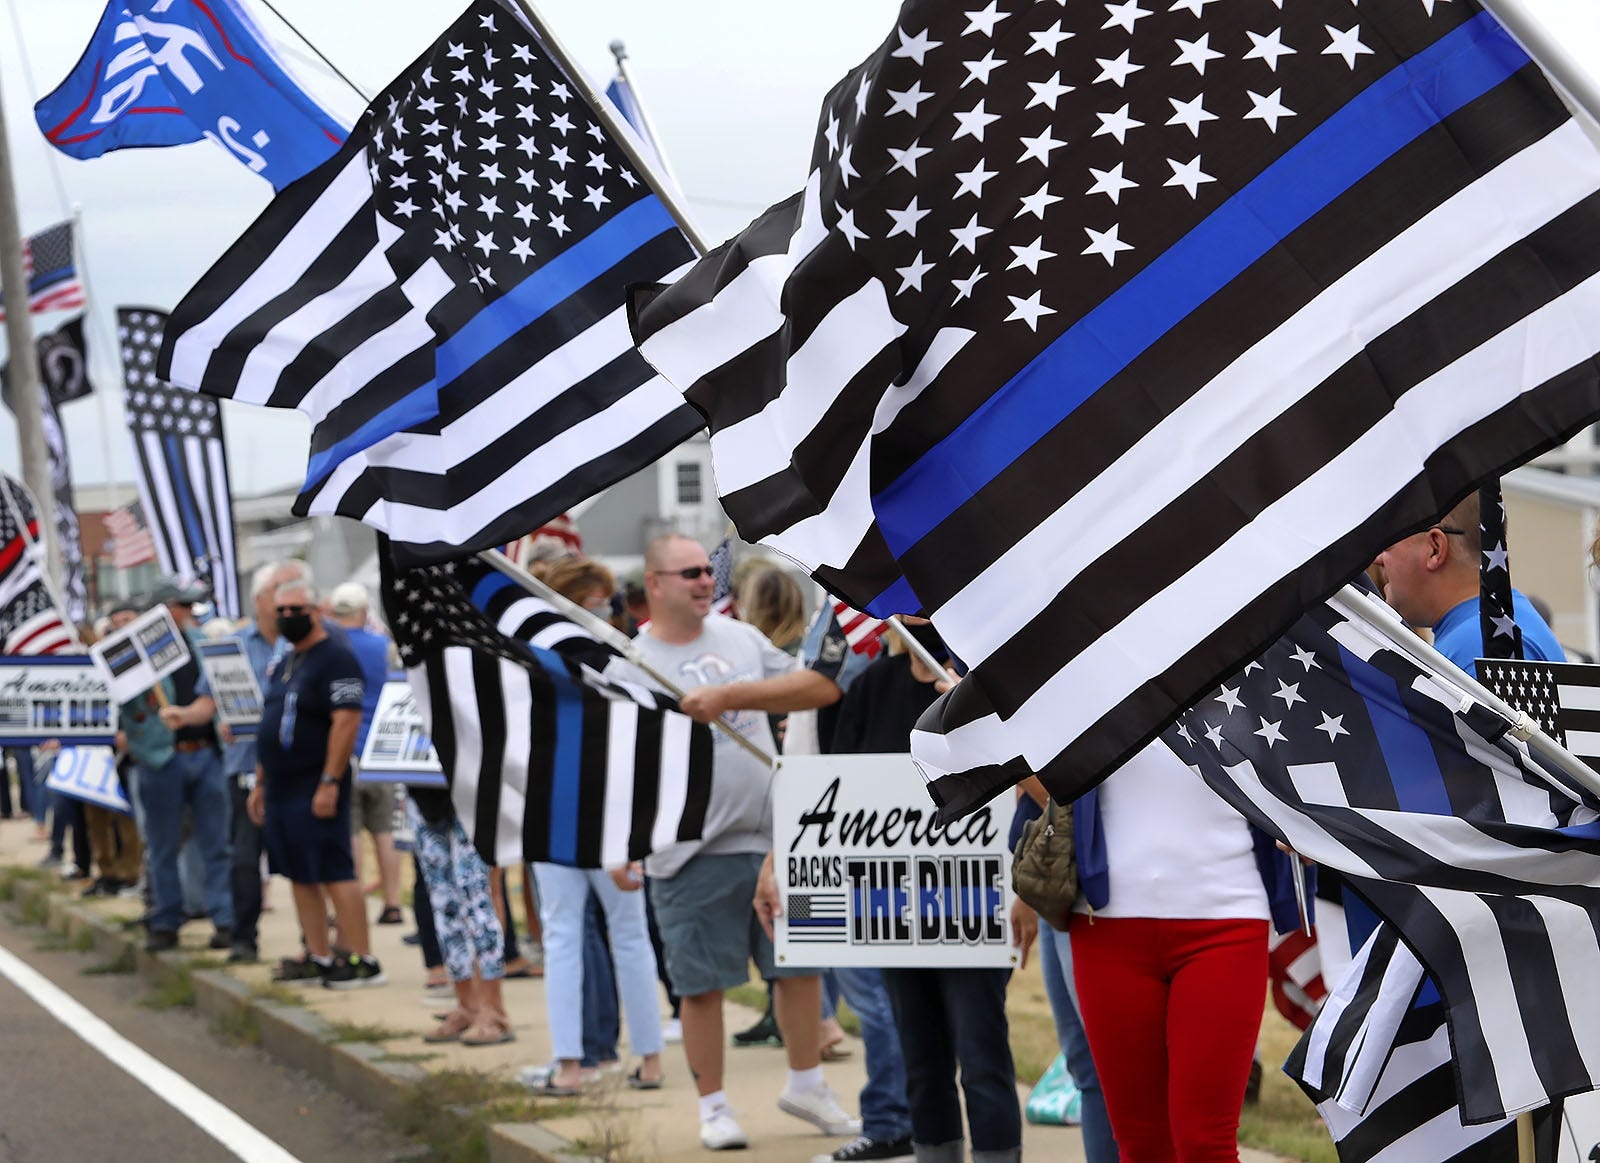 The thin blue line flag has become an increasingly divisive symbol